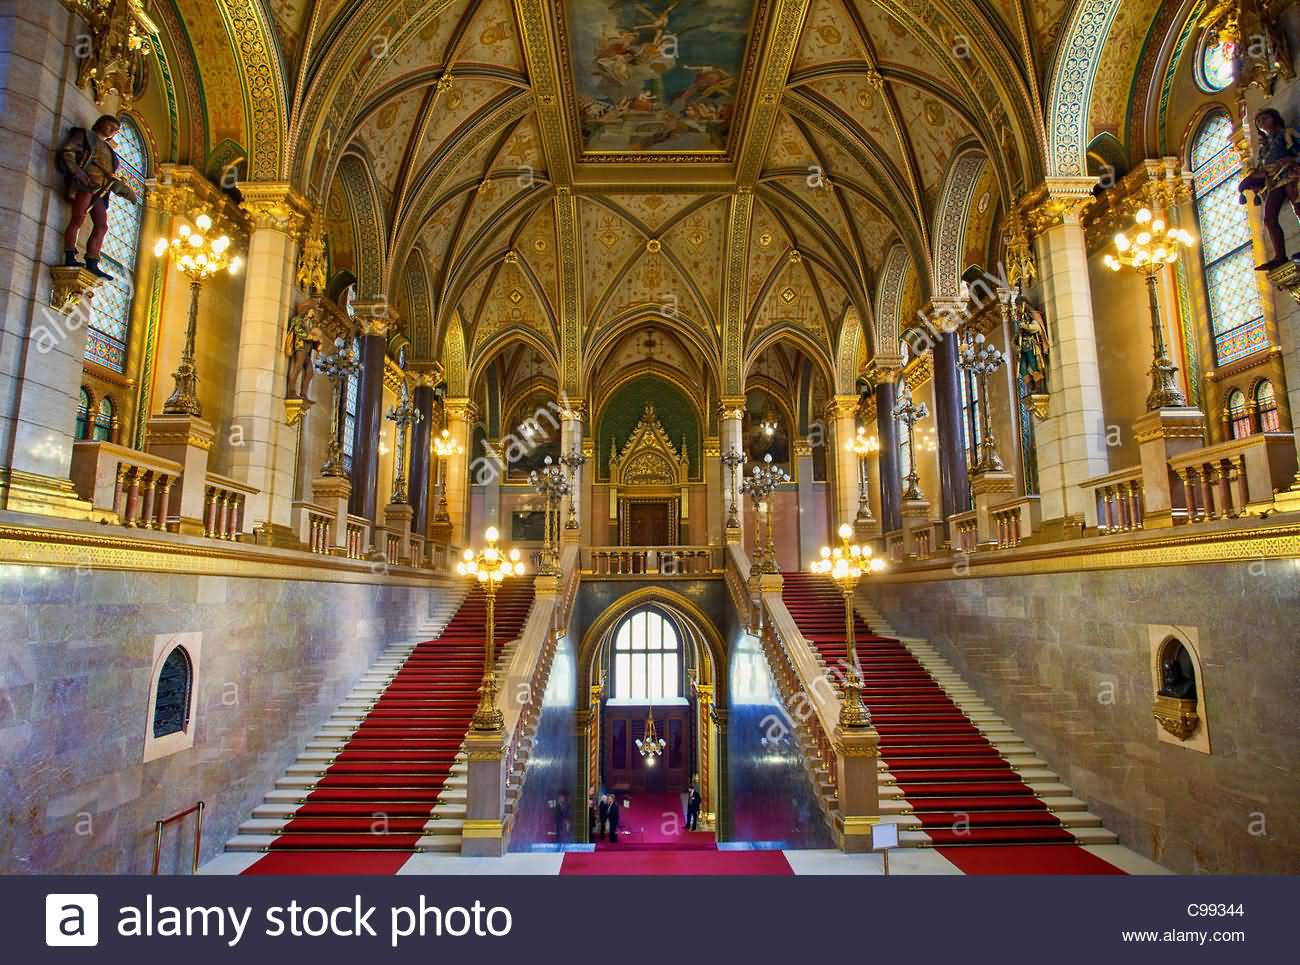 Interior View Of Stairway Of Hungarian Parliament Building